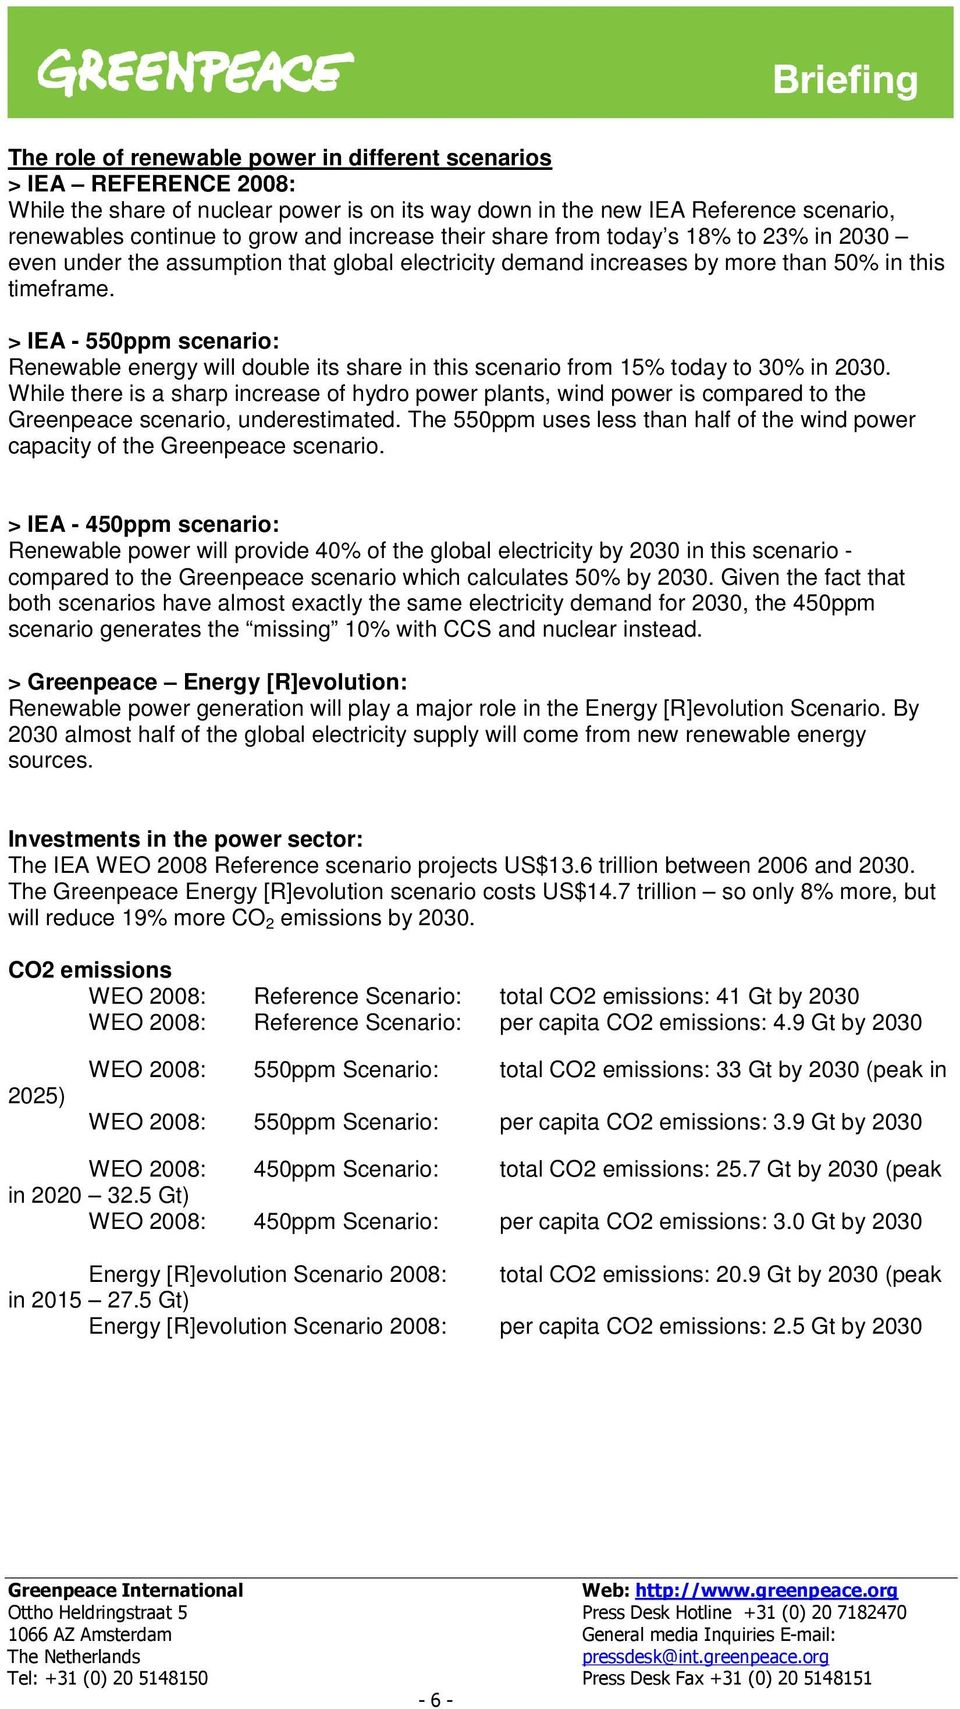 > IEA - 550ppm scenario: Renewable energy will double its share in this scenario from 15% today to 30% in 2030.